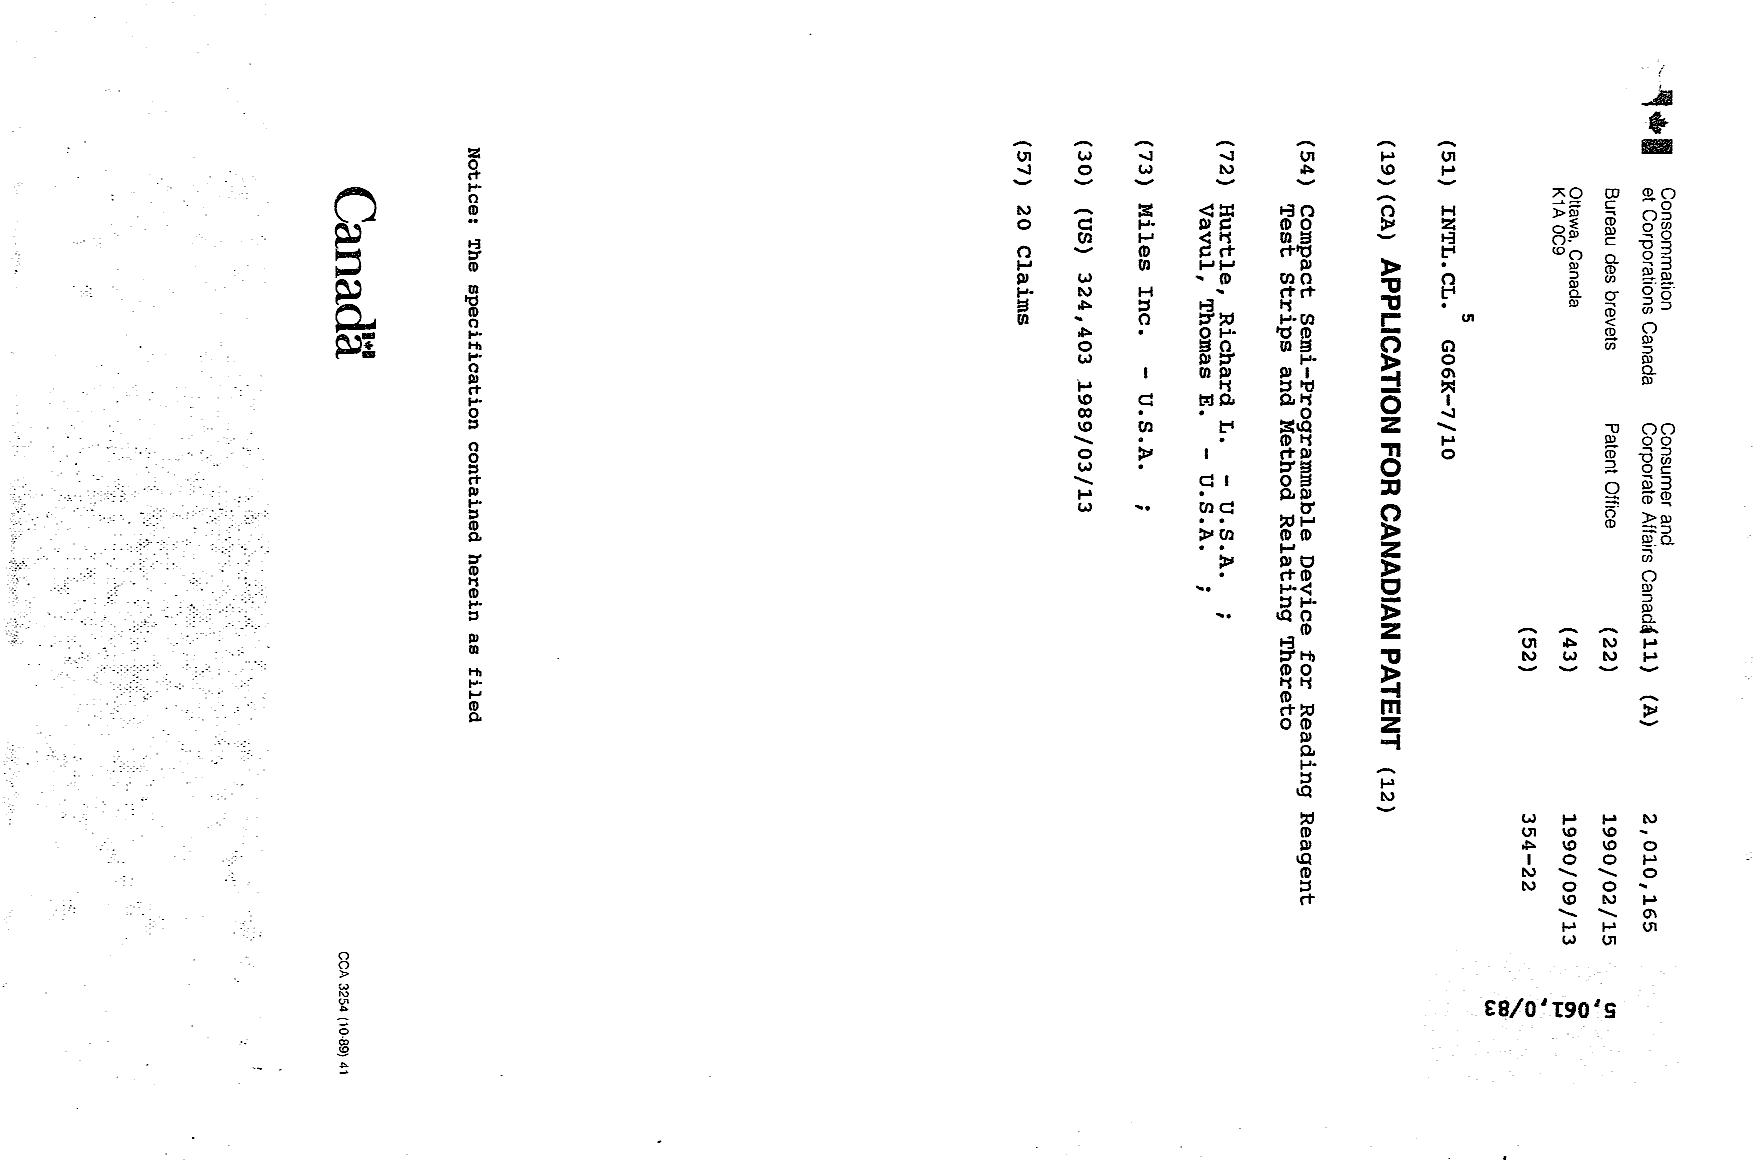 Canadian Patent Document 2010165. Cover Page 19900913. Image 1 of 1